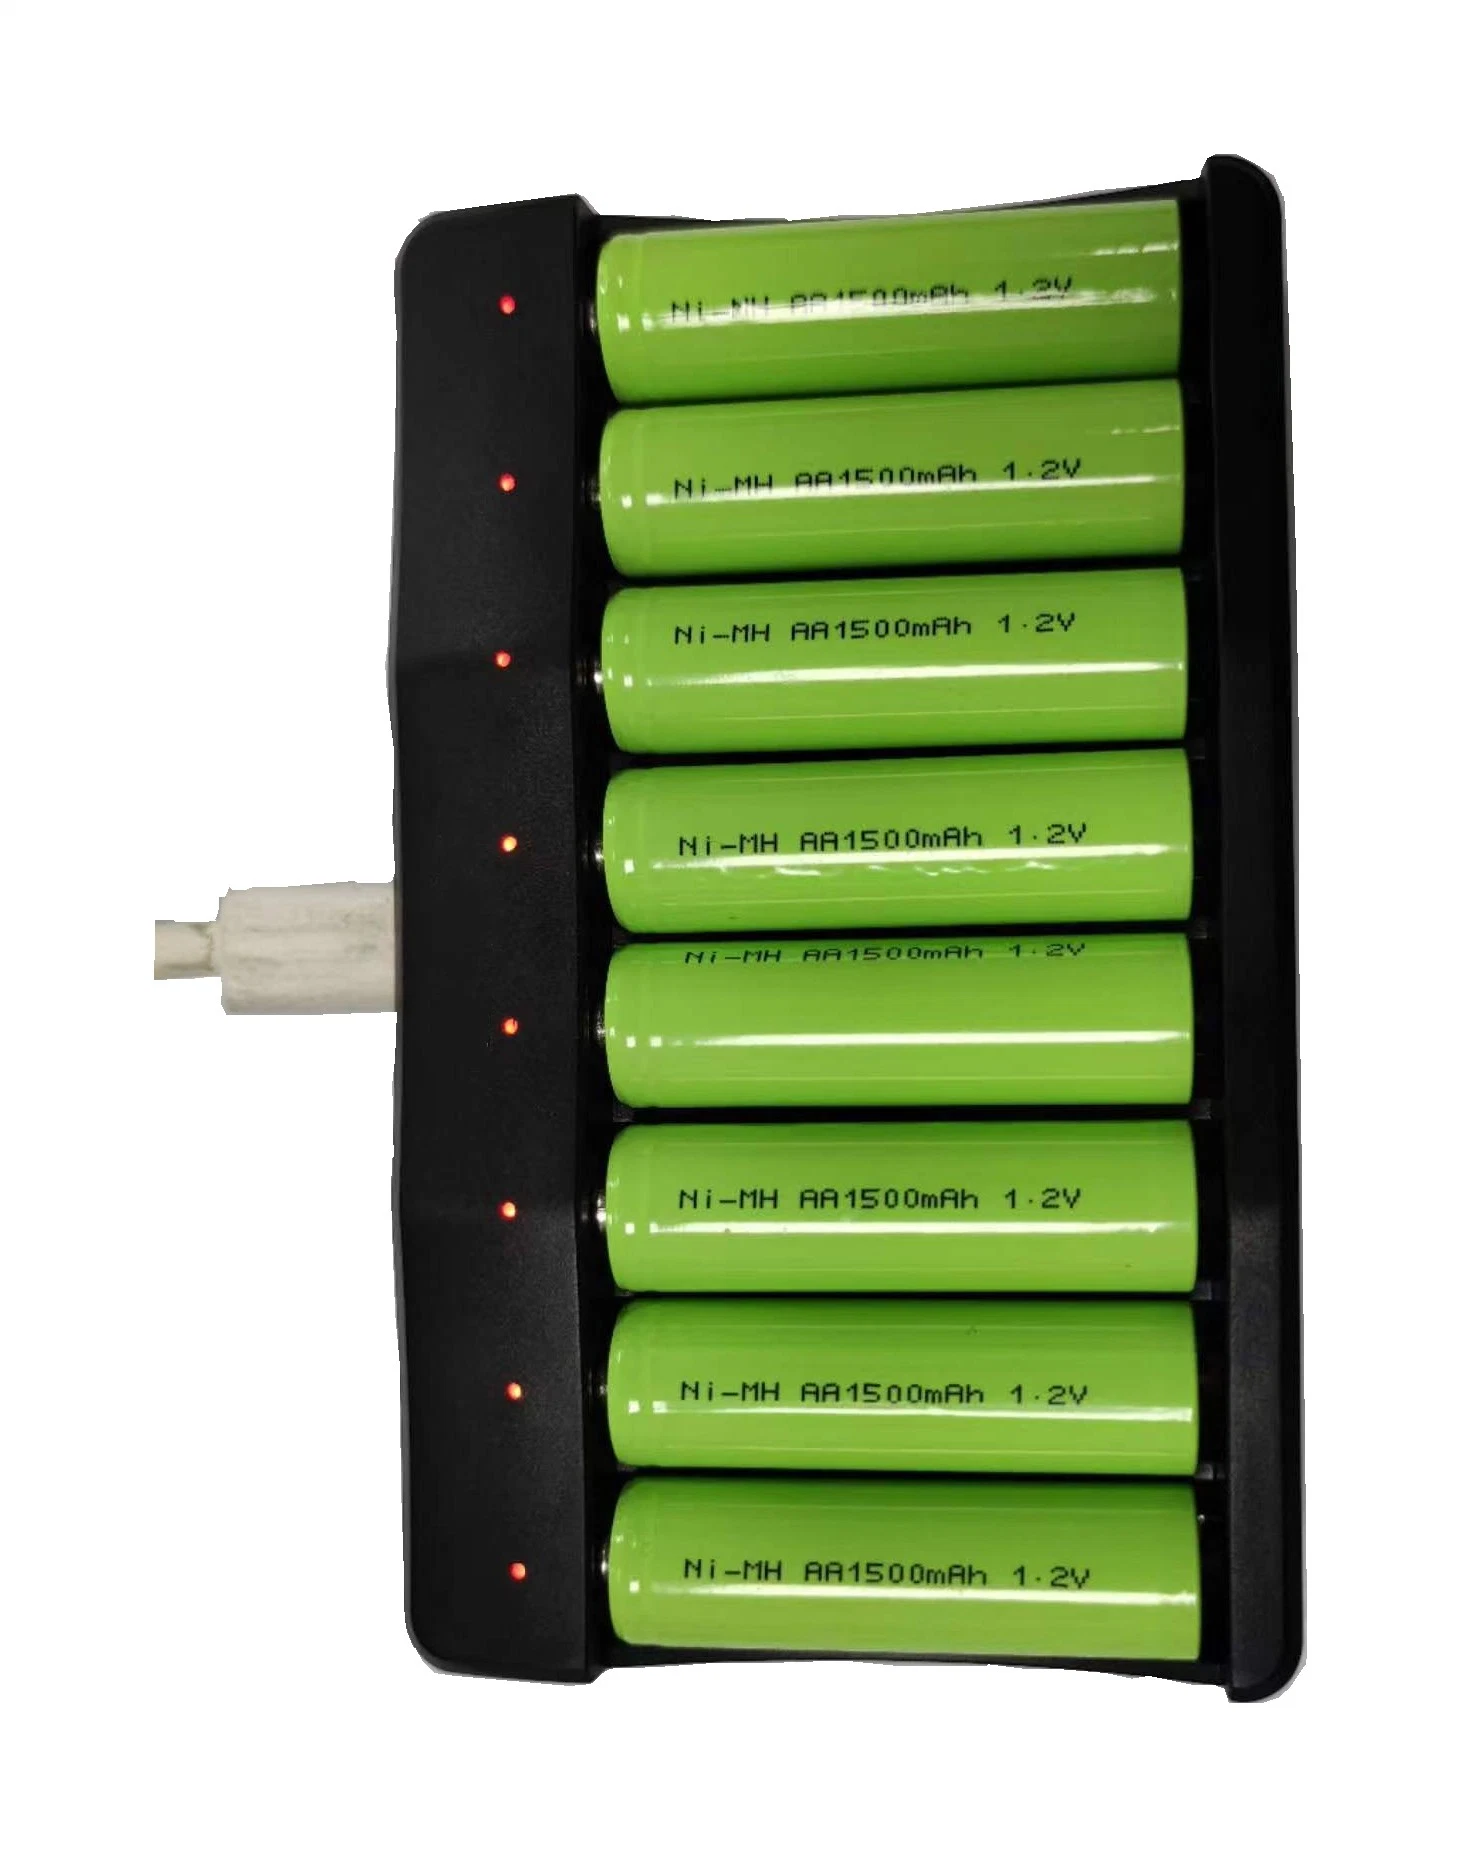 Hot Sale 8 Bay Smart Battery Charger LED Display for AA/AAA NiMH Rechargeable Batteries